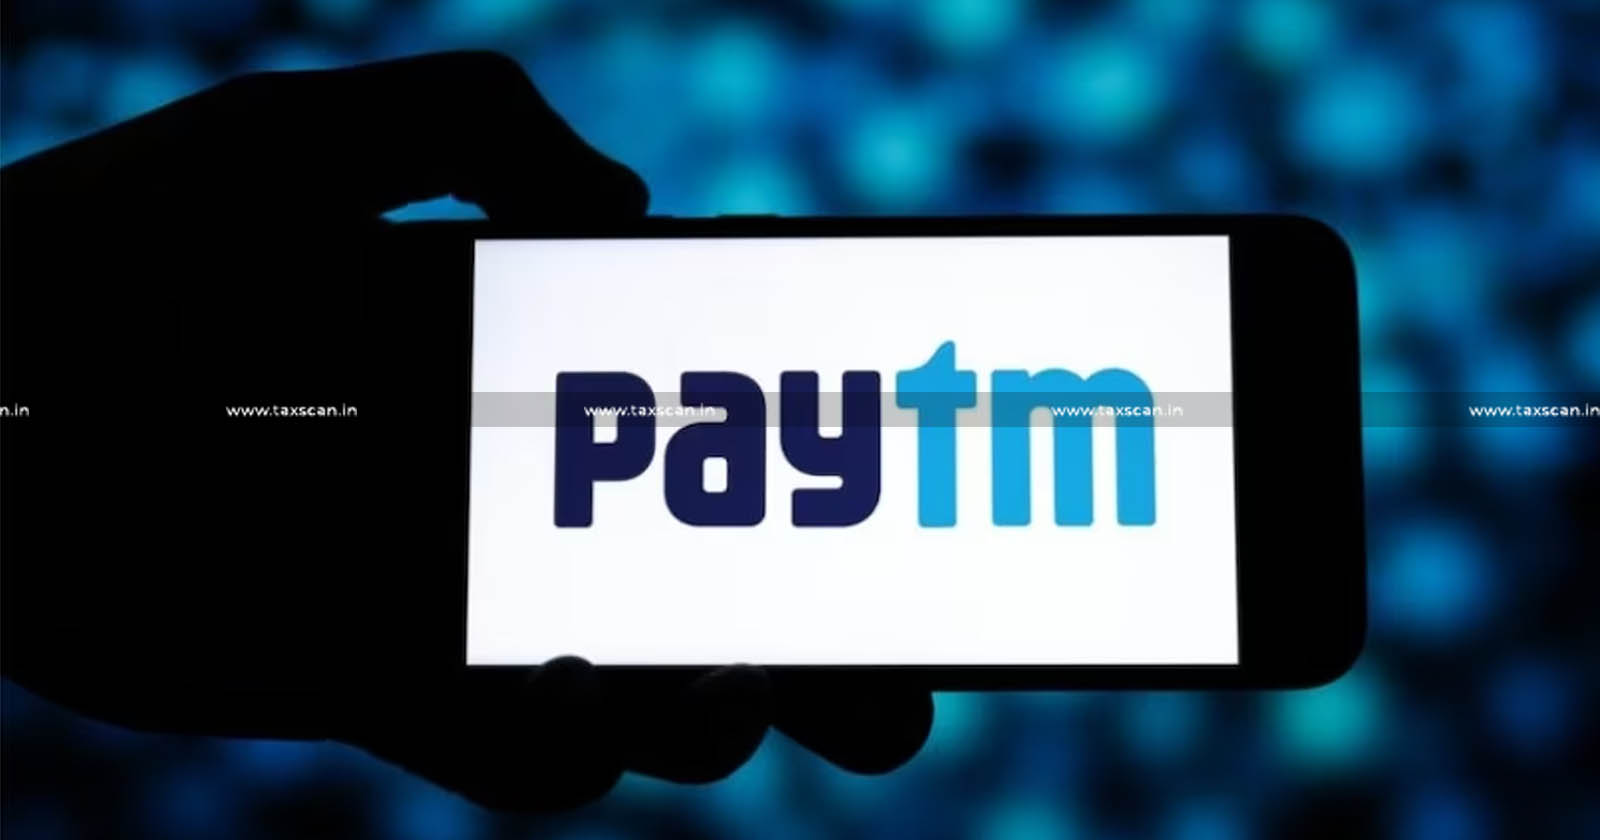 RBI - Paytm - Financial Services Secretary - Reserve Bank of India - Clarification on Paytm issue - taxscan